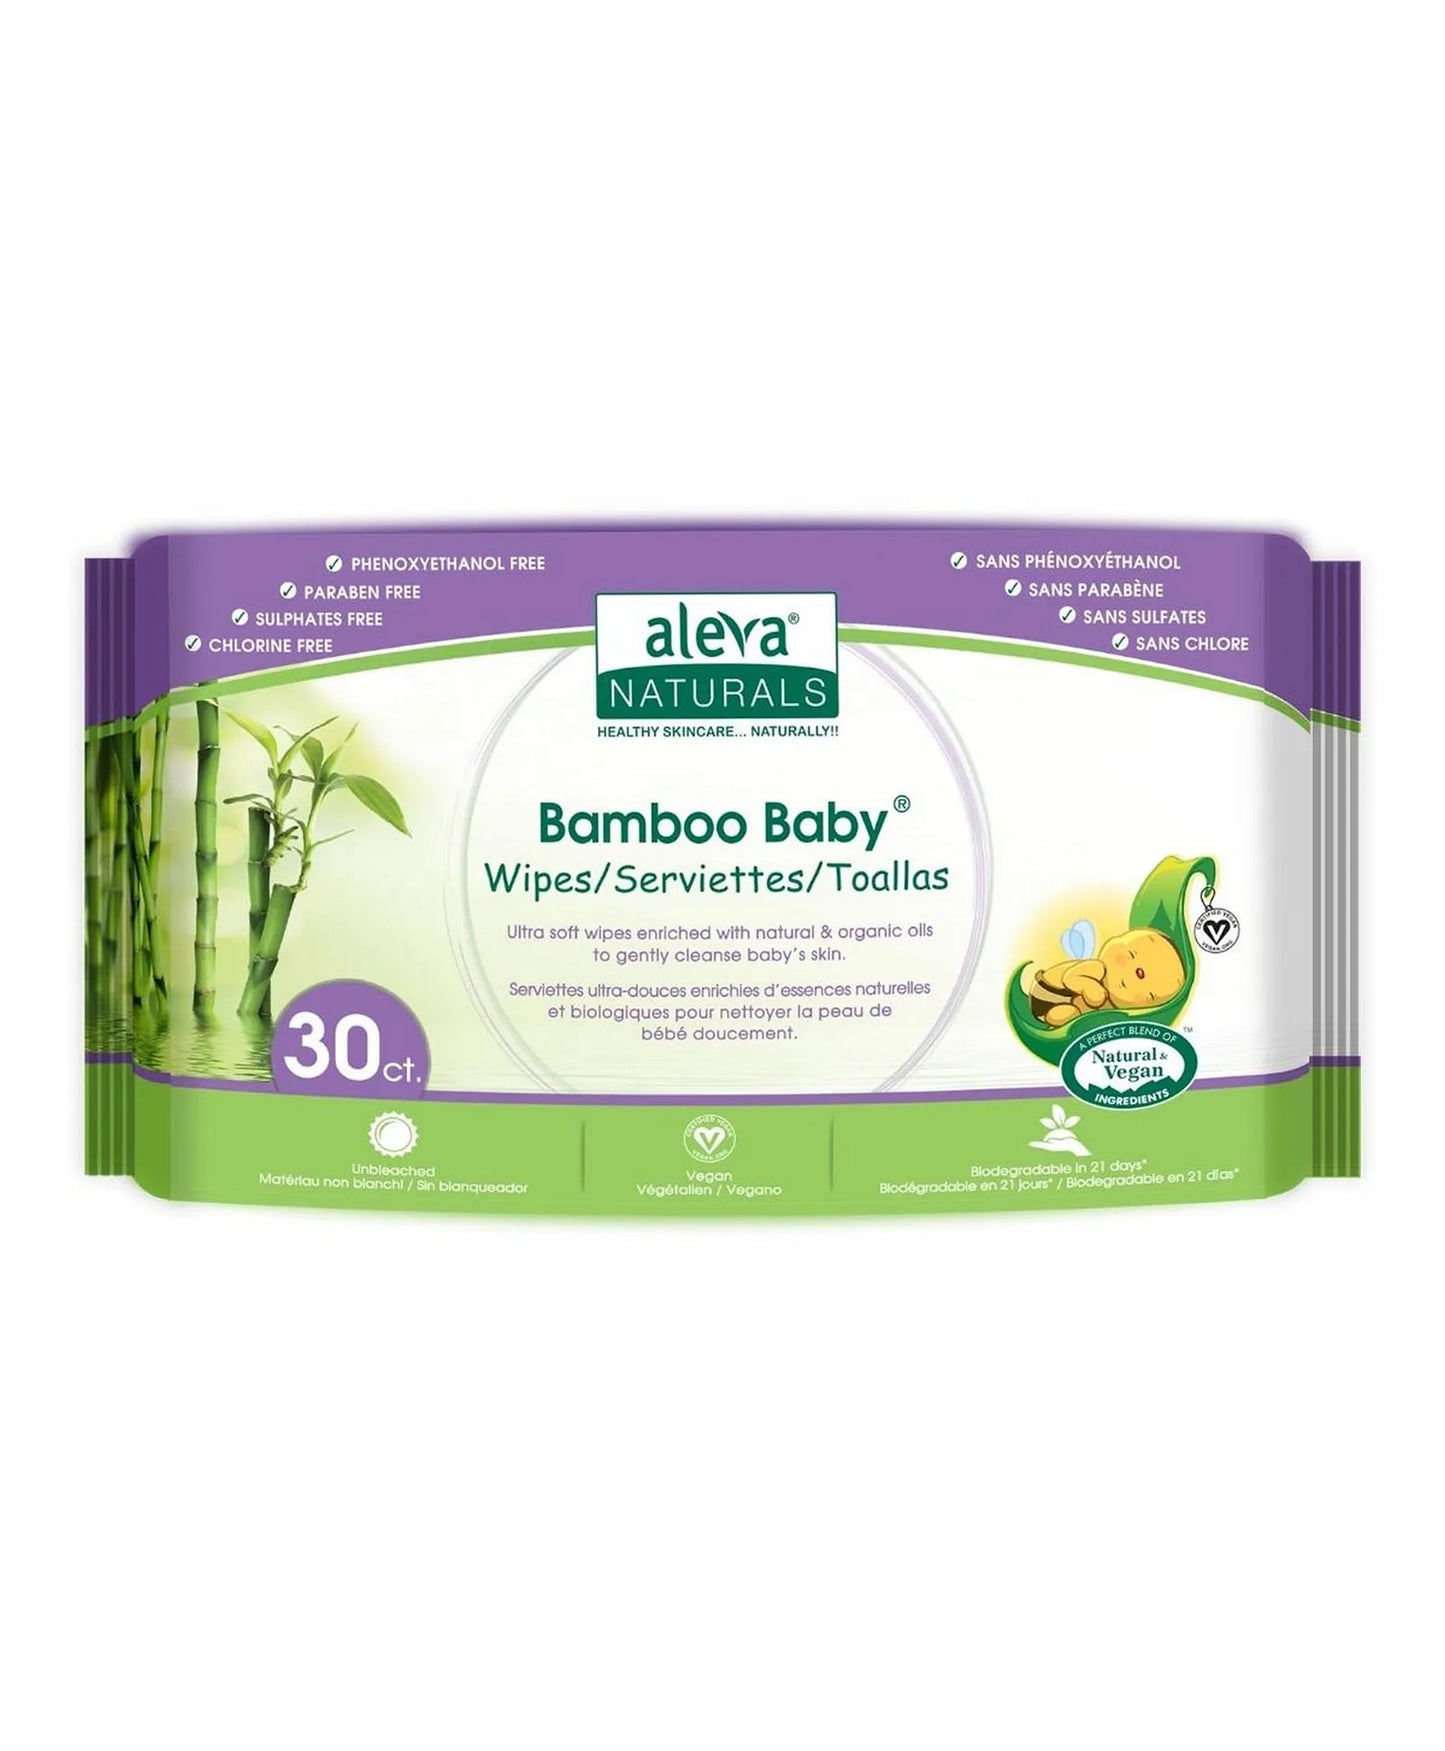 Aleva Naturals Bamboo Baby Wipes - Travel Size - 30ct